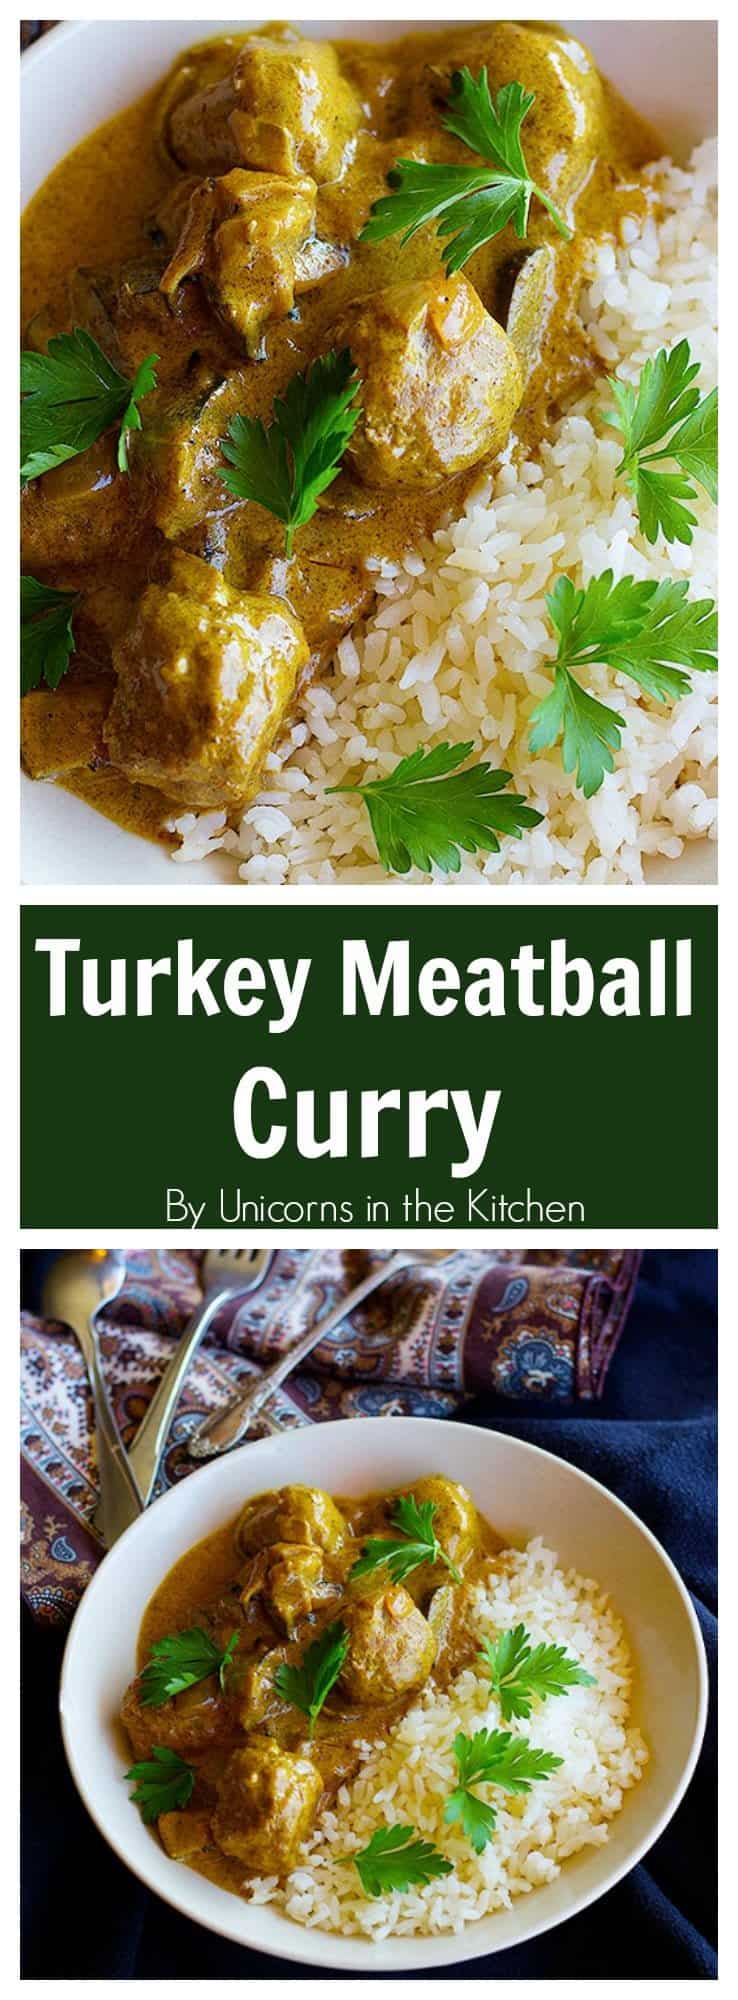 Spice up your curry game with this Turkey Meatball Curry which has a special ingredient that gives a nice kick to the dish. Serve with a side of rice to turn it into a full meal! 